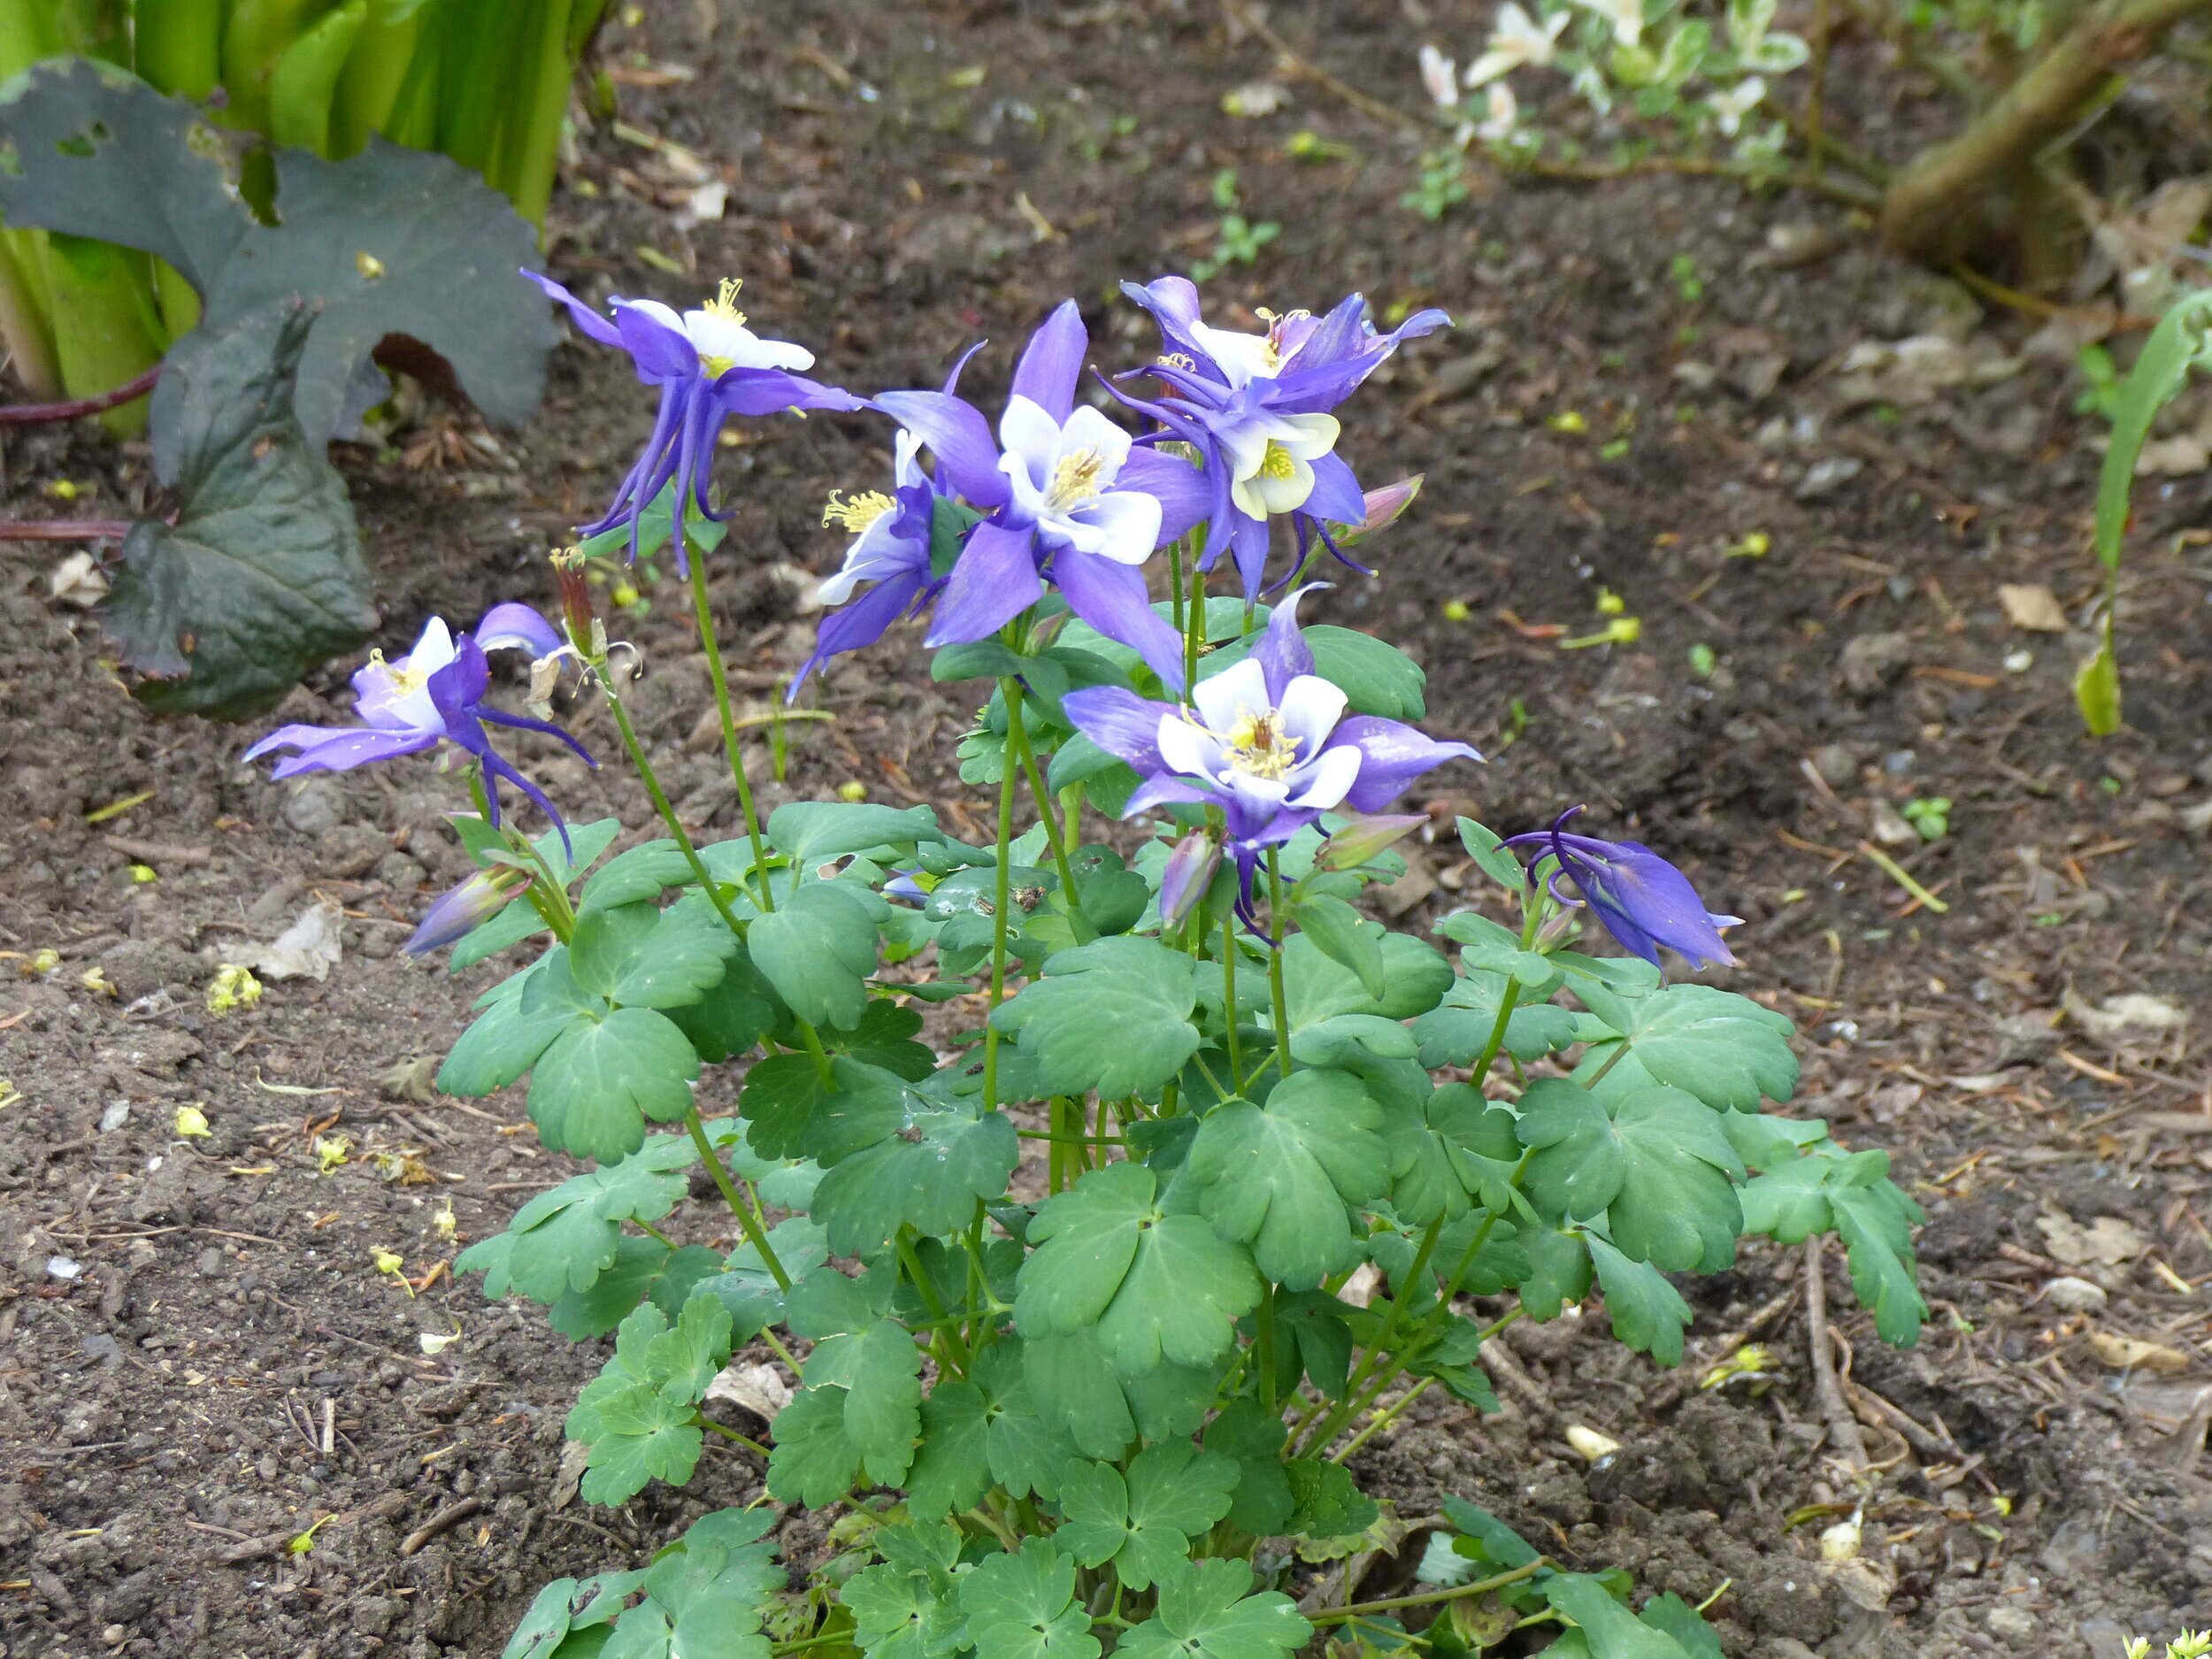  Columbines bloom from April until fall. Aquelligia (columbine) is seen in many colors and shapes, blooming from April until fall. 